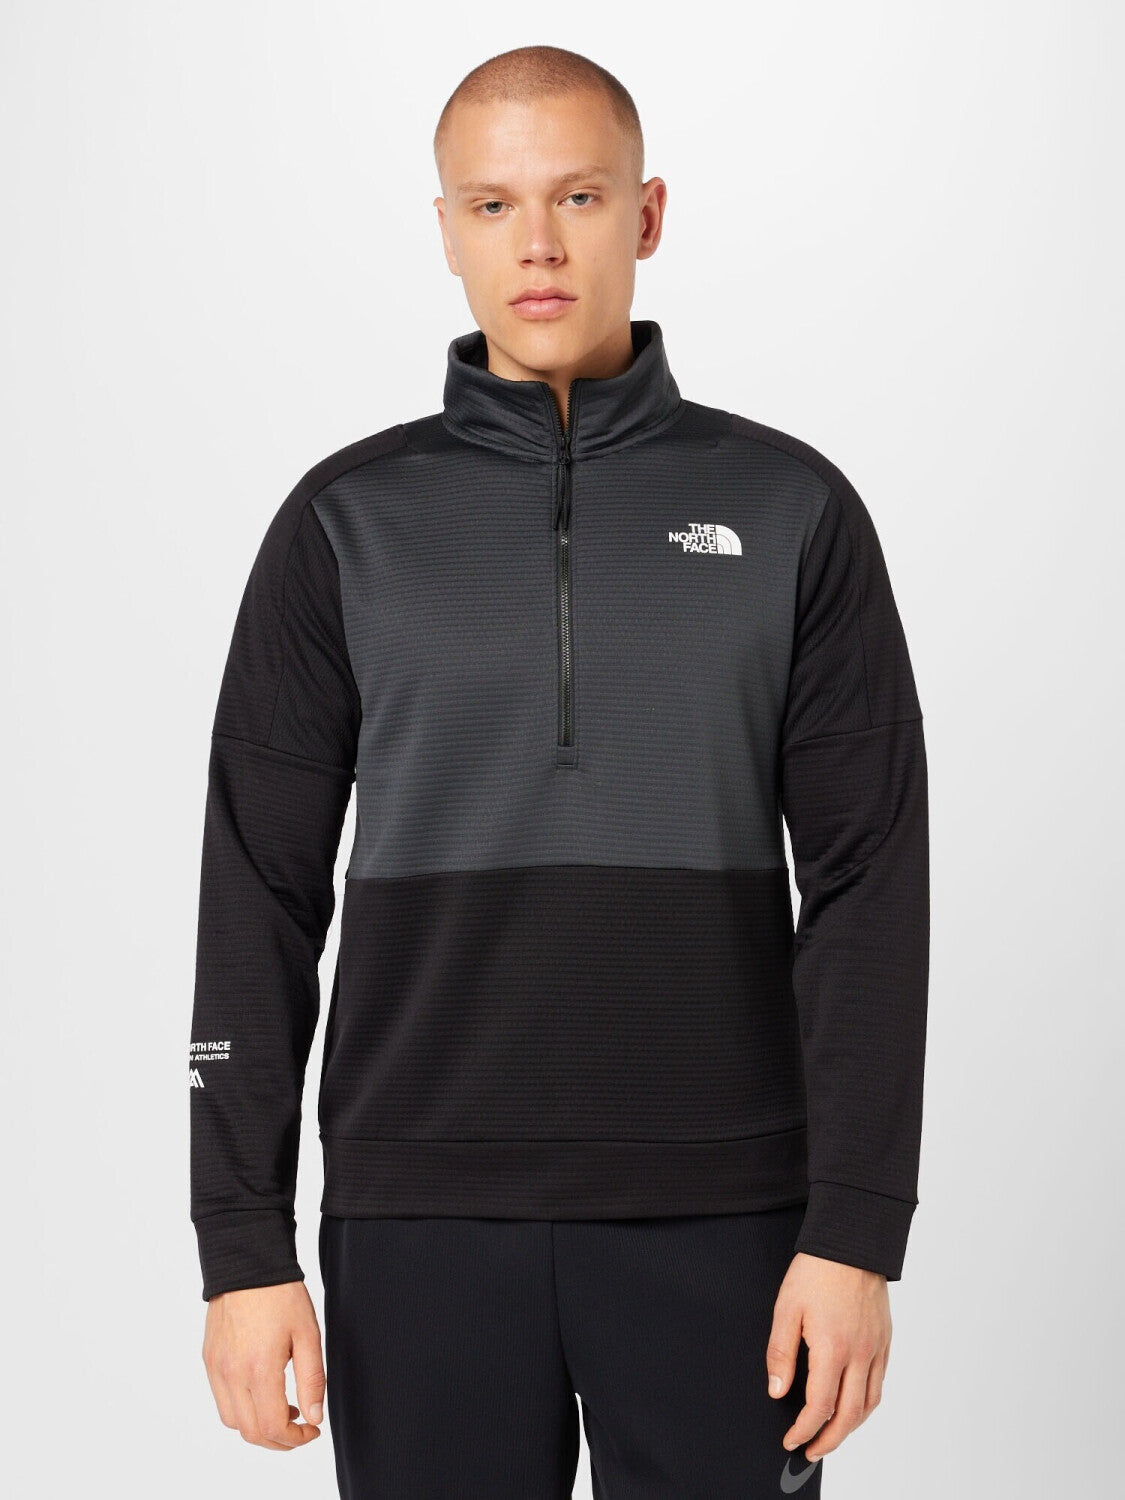 THE NORTH FACE NF0A8247 HALF ZIP SWEATER-GREY | BLK